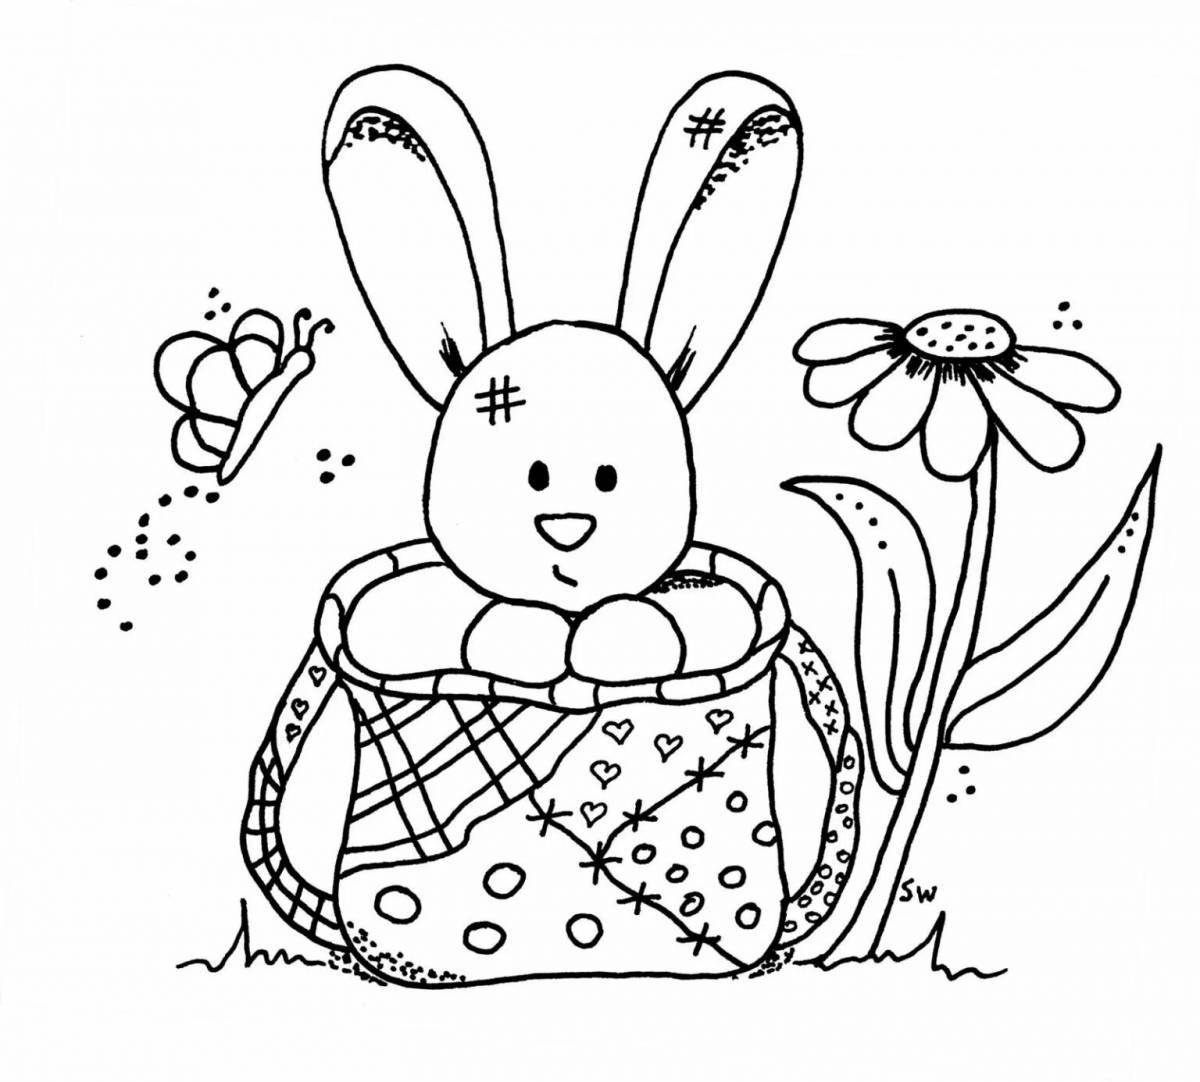 Joyful bunny coloring book with a gift